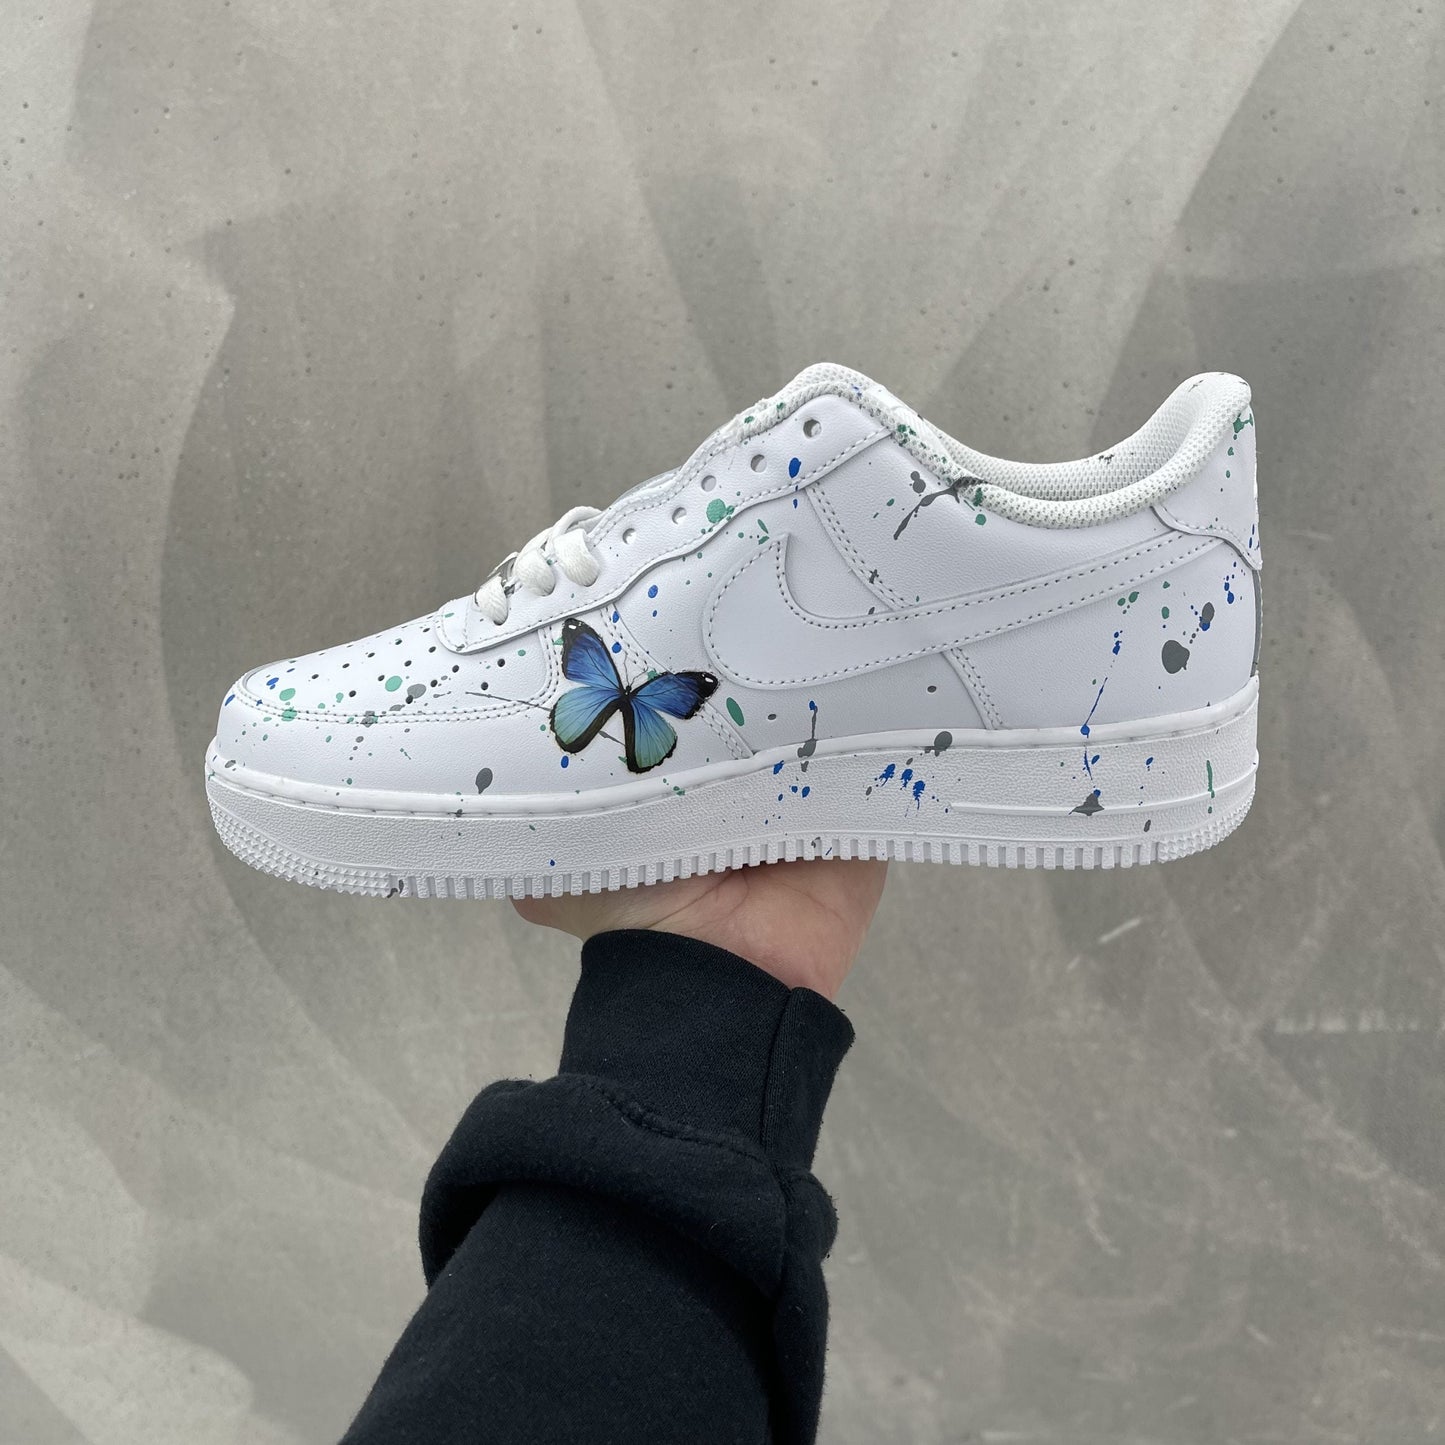 Custom AIR FORCE 1  - Butterfly splash (blue/turquoise/grey)